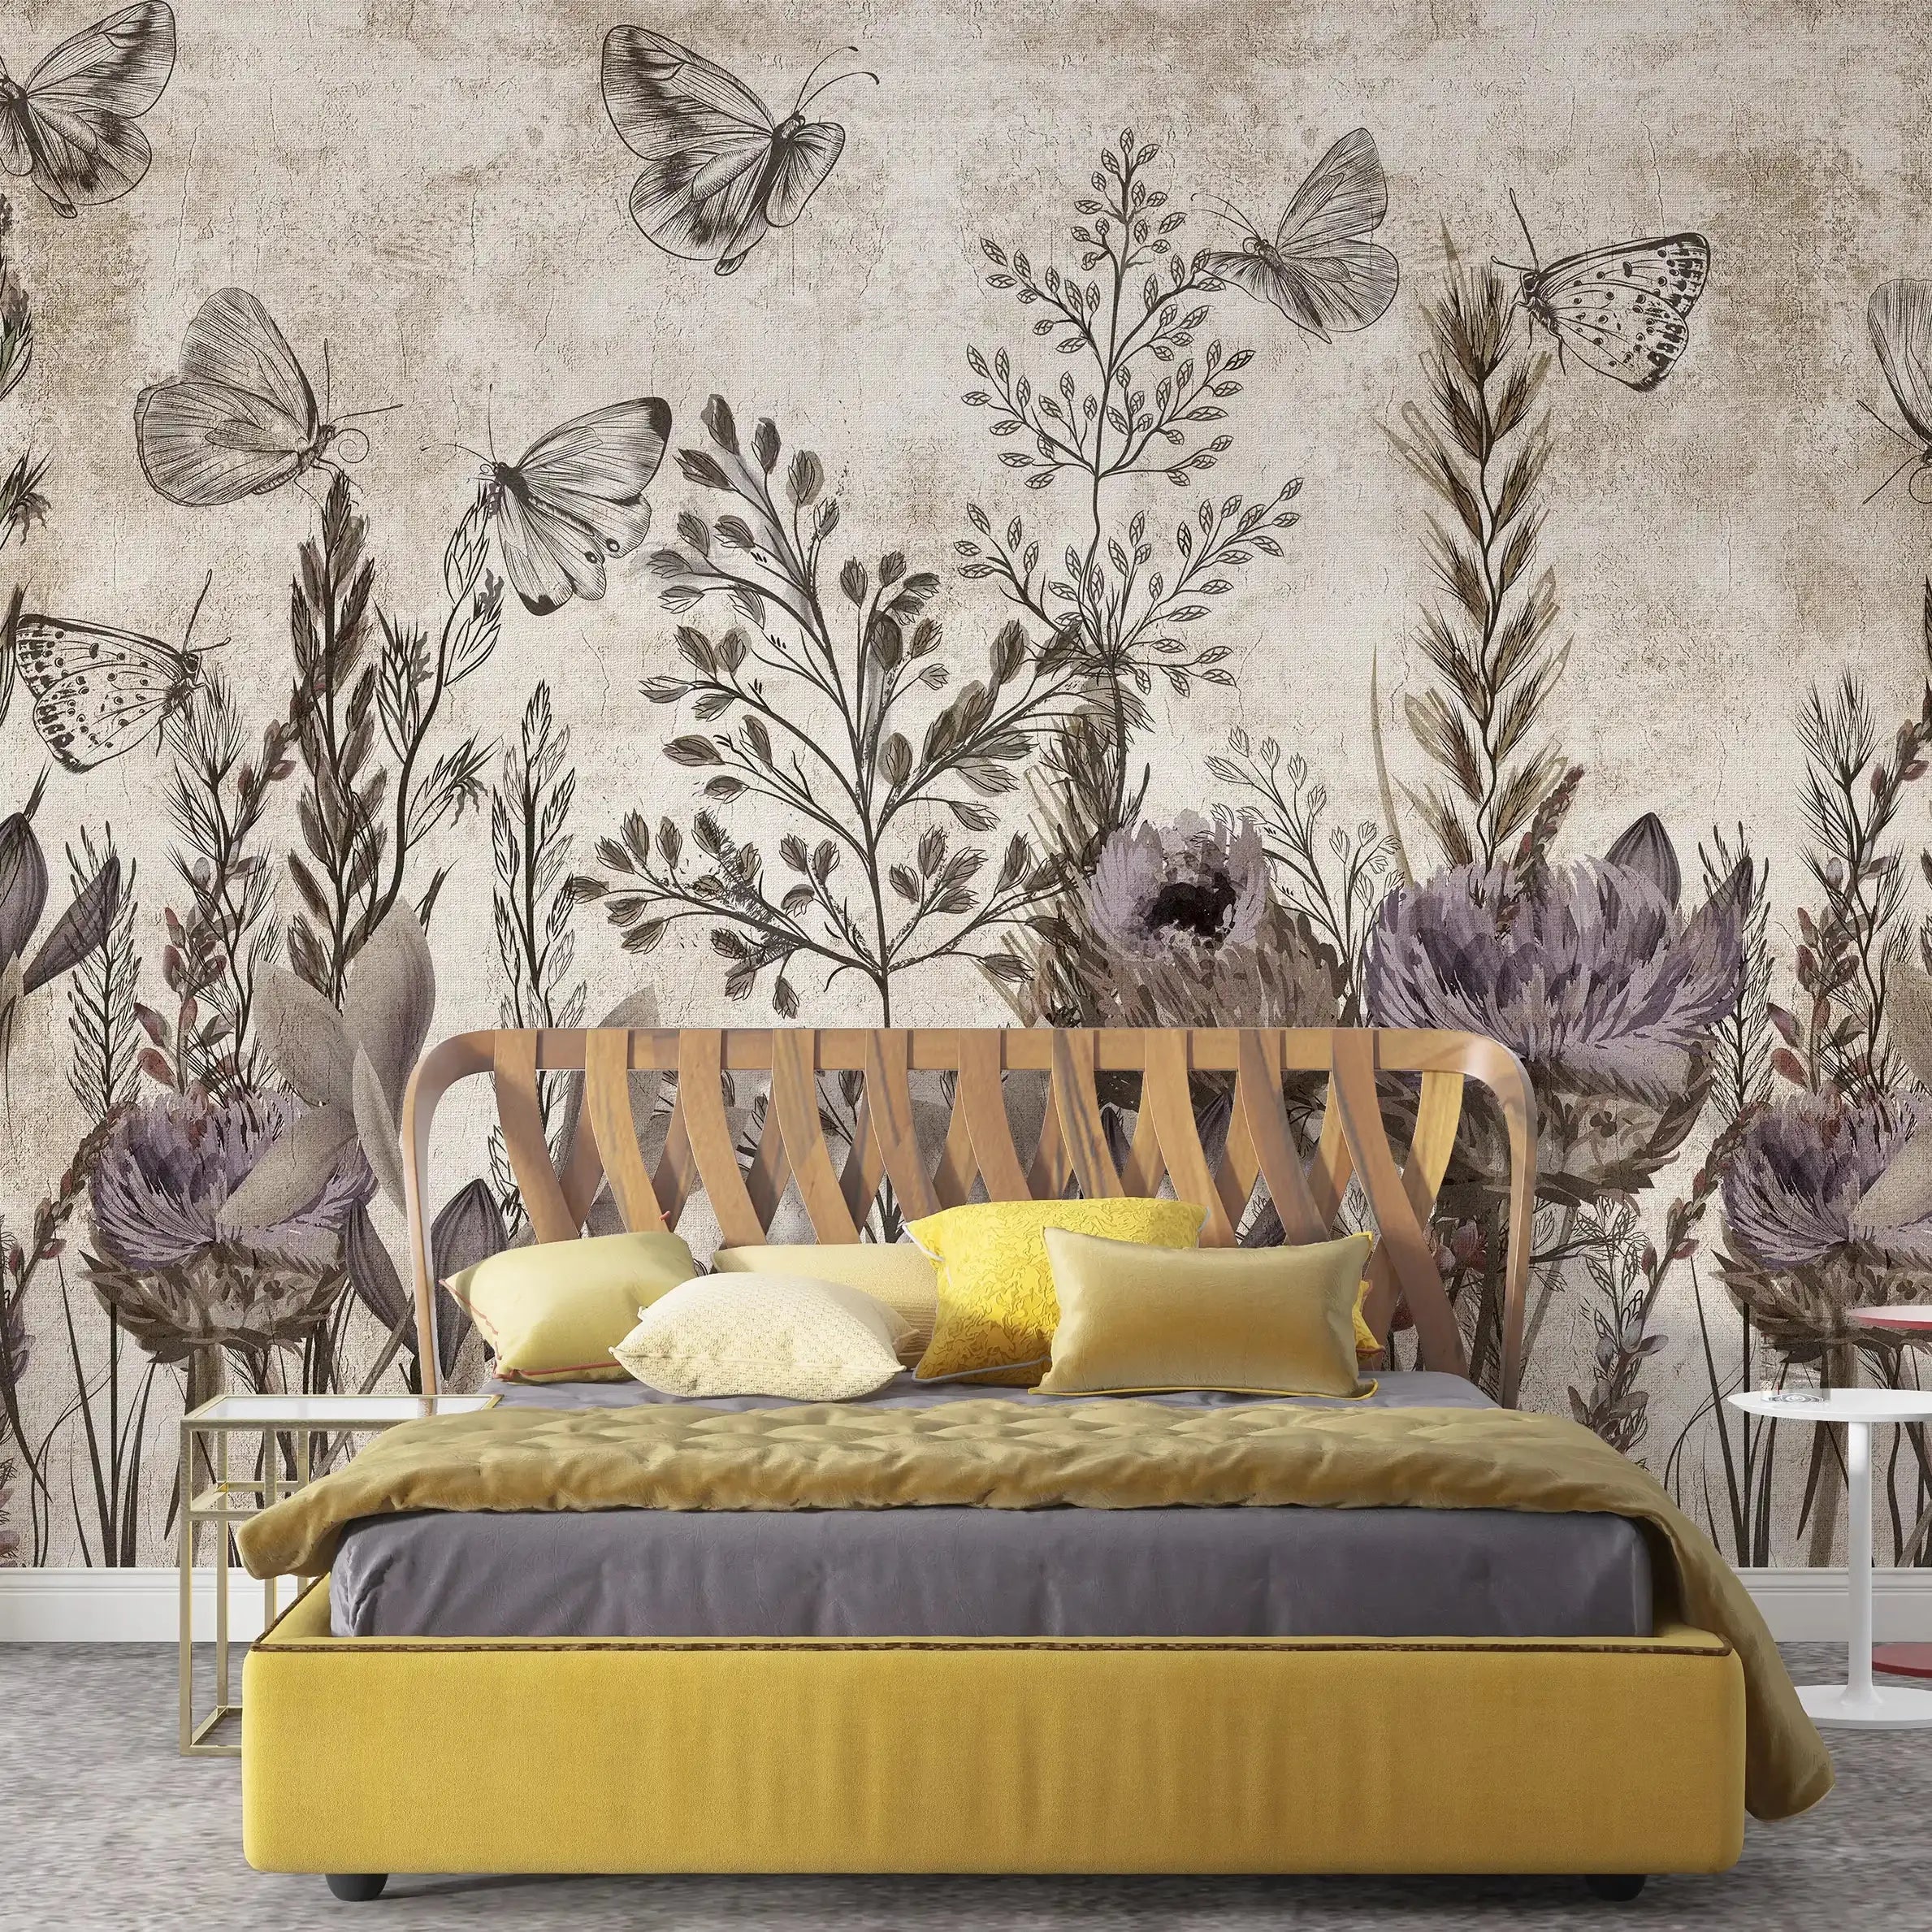 3044-D / Modern Tropical Wallpaper - Peel and Stick, Removable Botanical Design with Muted Whimsy Flowers, Ideal for Bedroom, Bathroom & Kitchen Wall Decor - Artevella